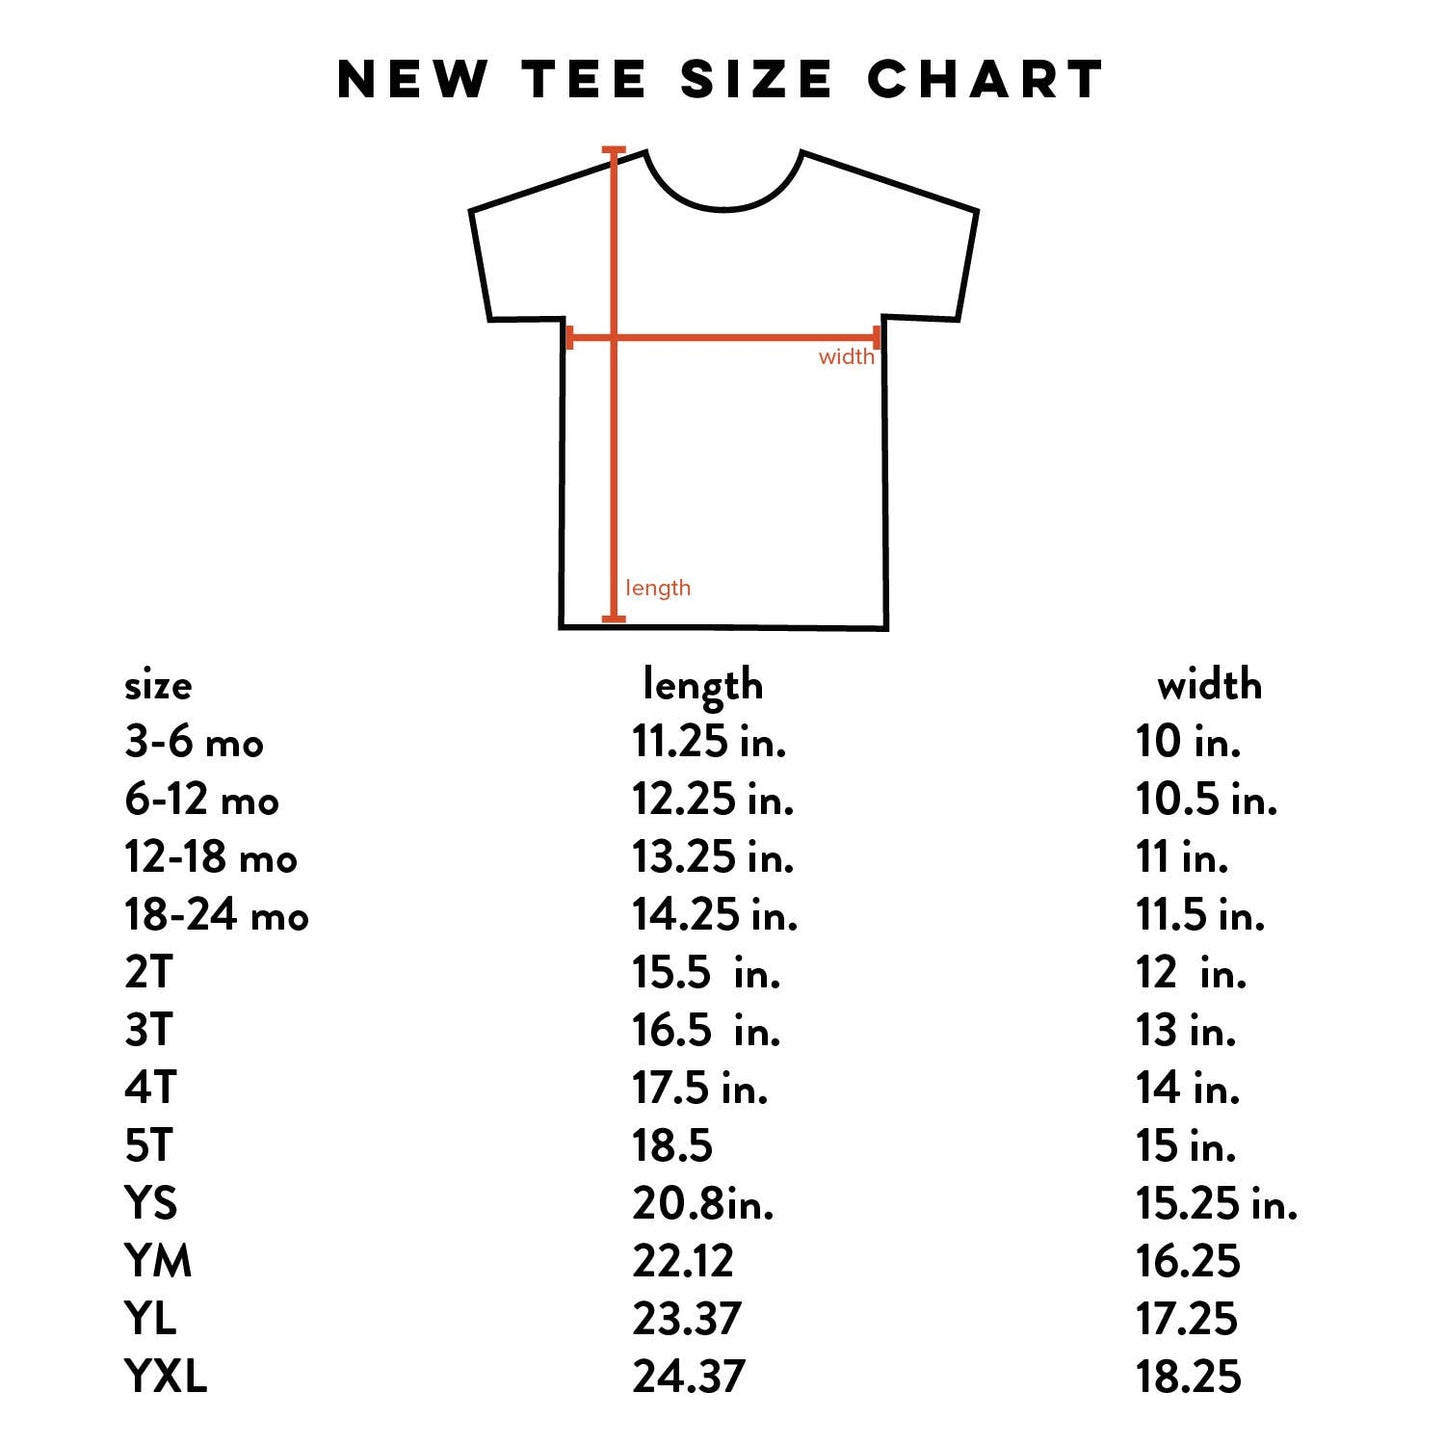 New Tee Size Guide for the Pho shirt.